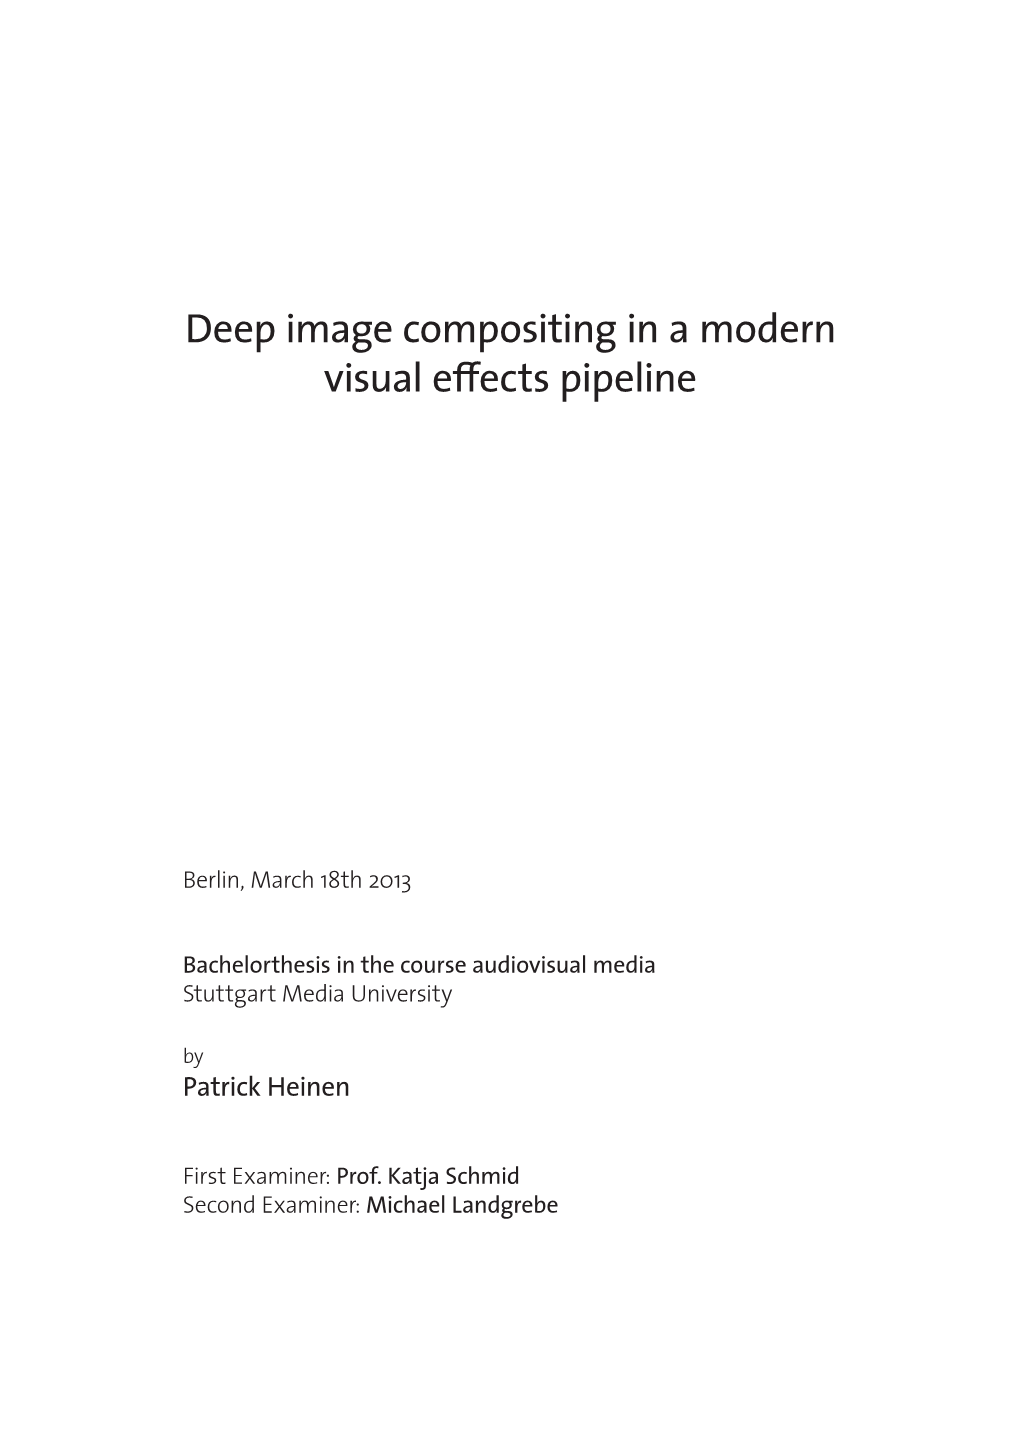 Deep Image Compositing in a Modern Visual Effects Pipeline